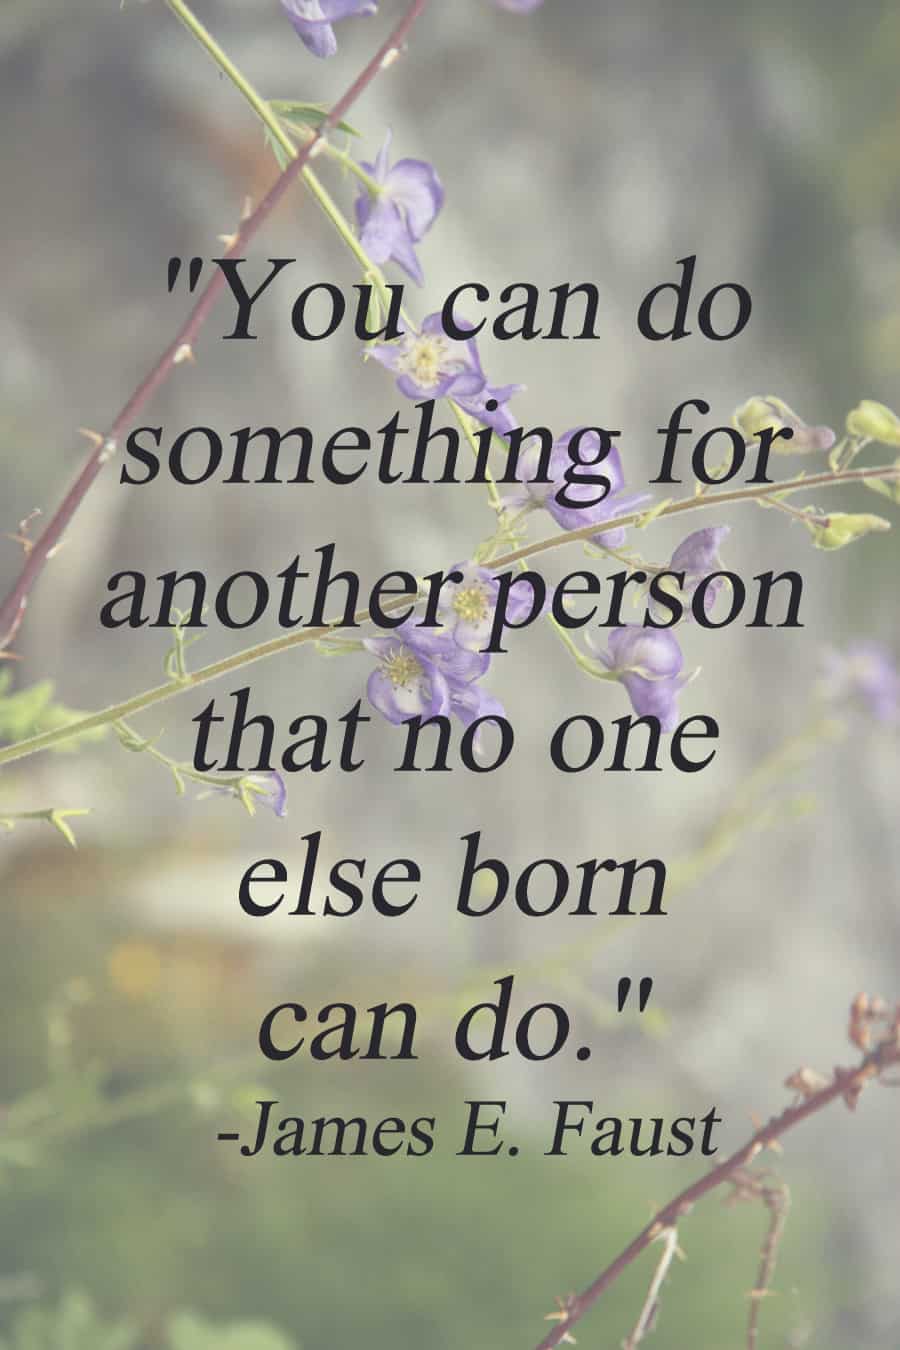 "You can do something for another person that no one else born can do." - James E. Faust | via Autumn All Along 